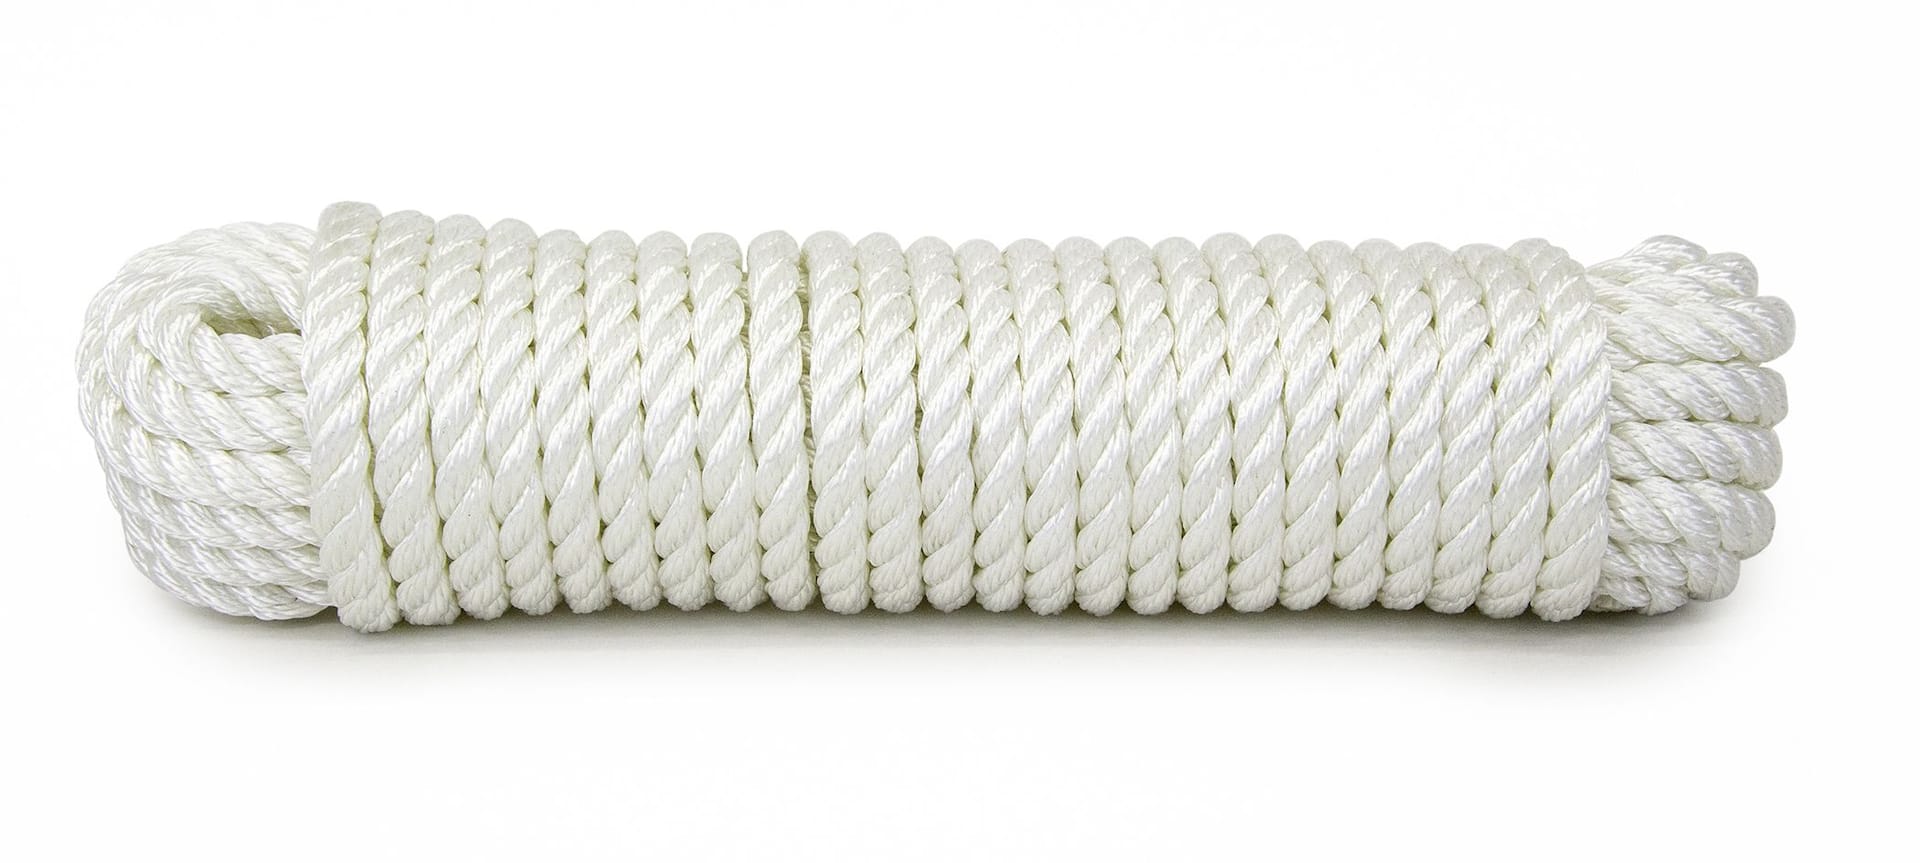 White Twisted Cotton Rope - 3 Strands Cord / Strong Quality String Link